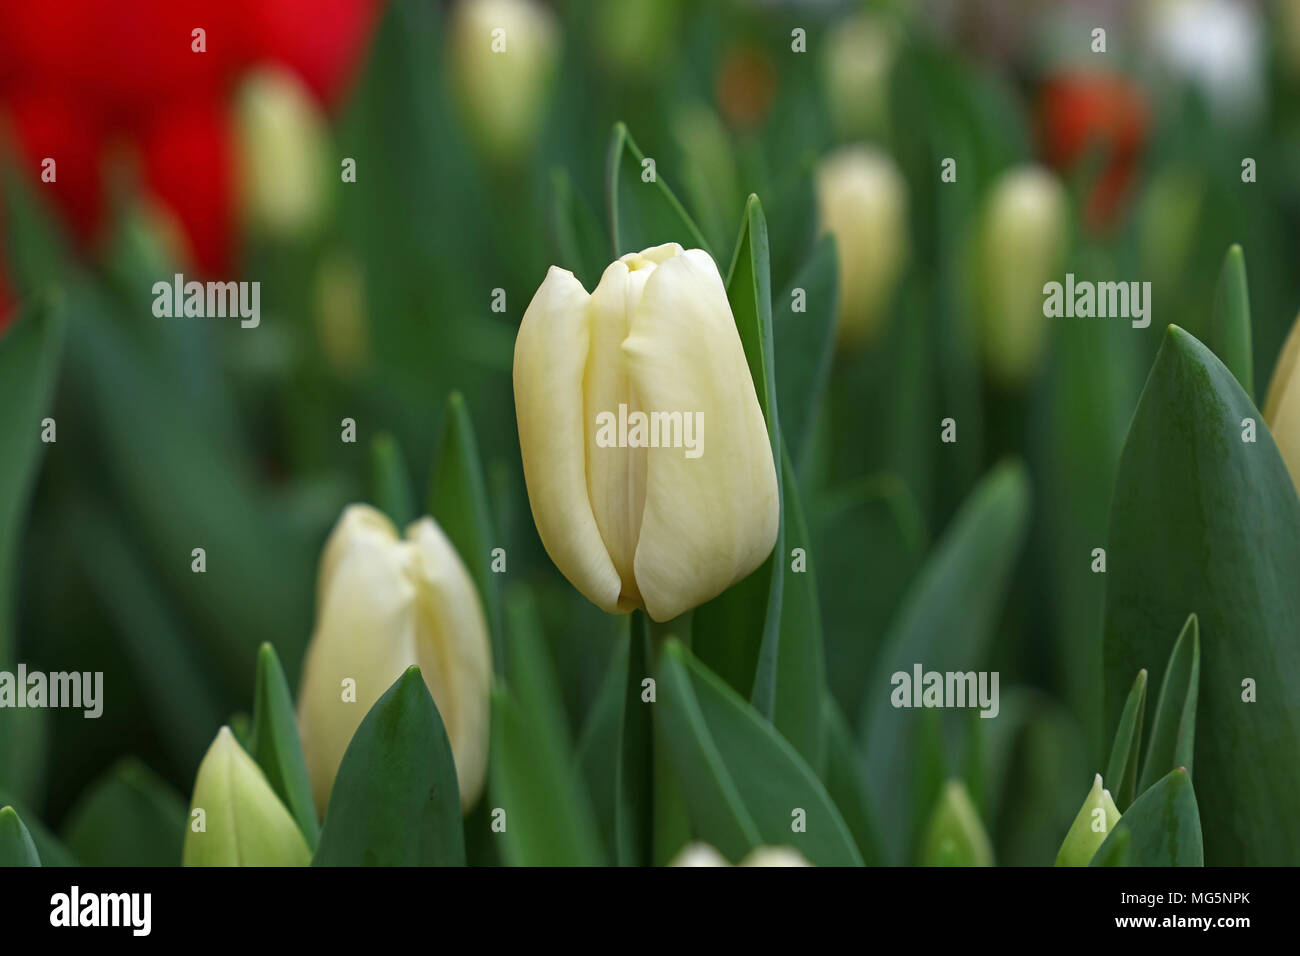 Pale white fresh springtime tulip flowers with green leaves growing in field, close up, low angle view Stock Photo